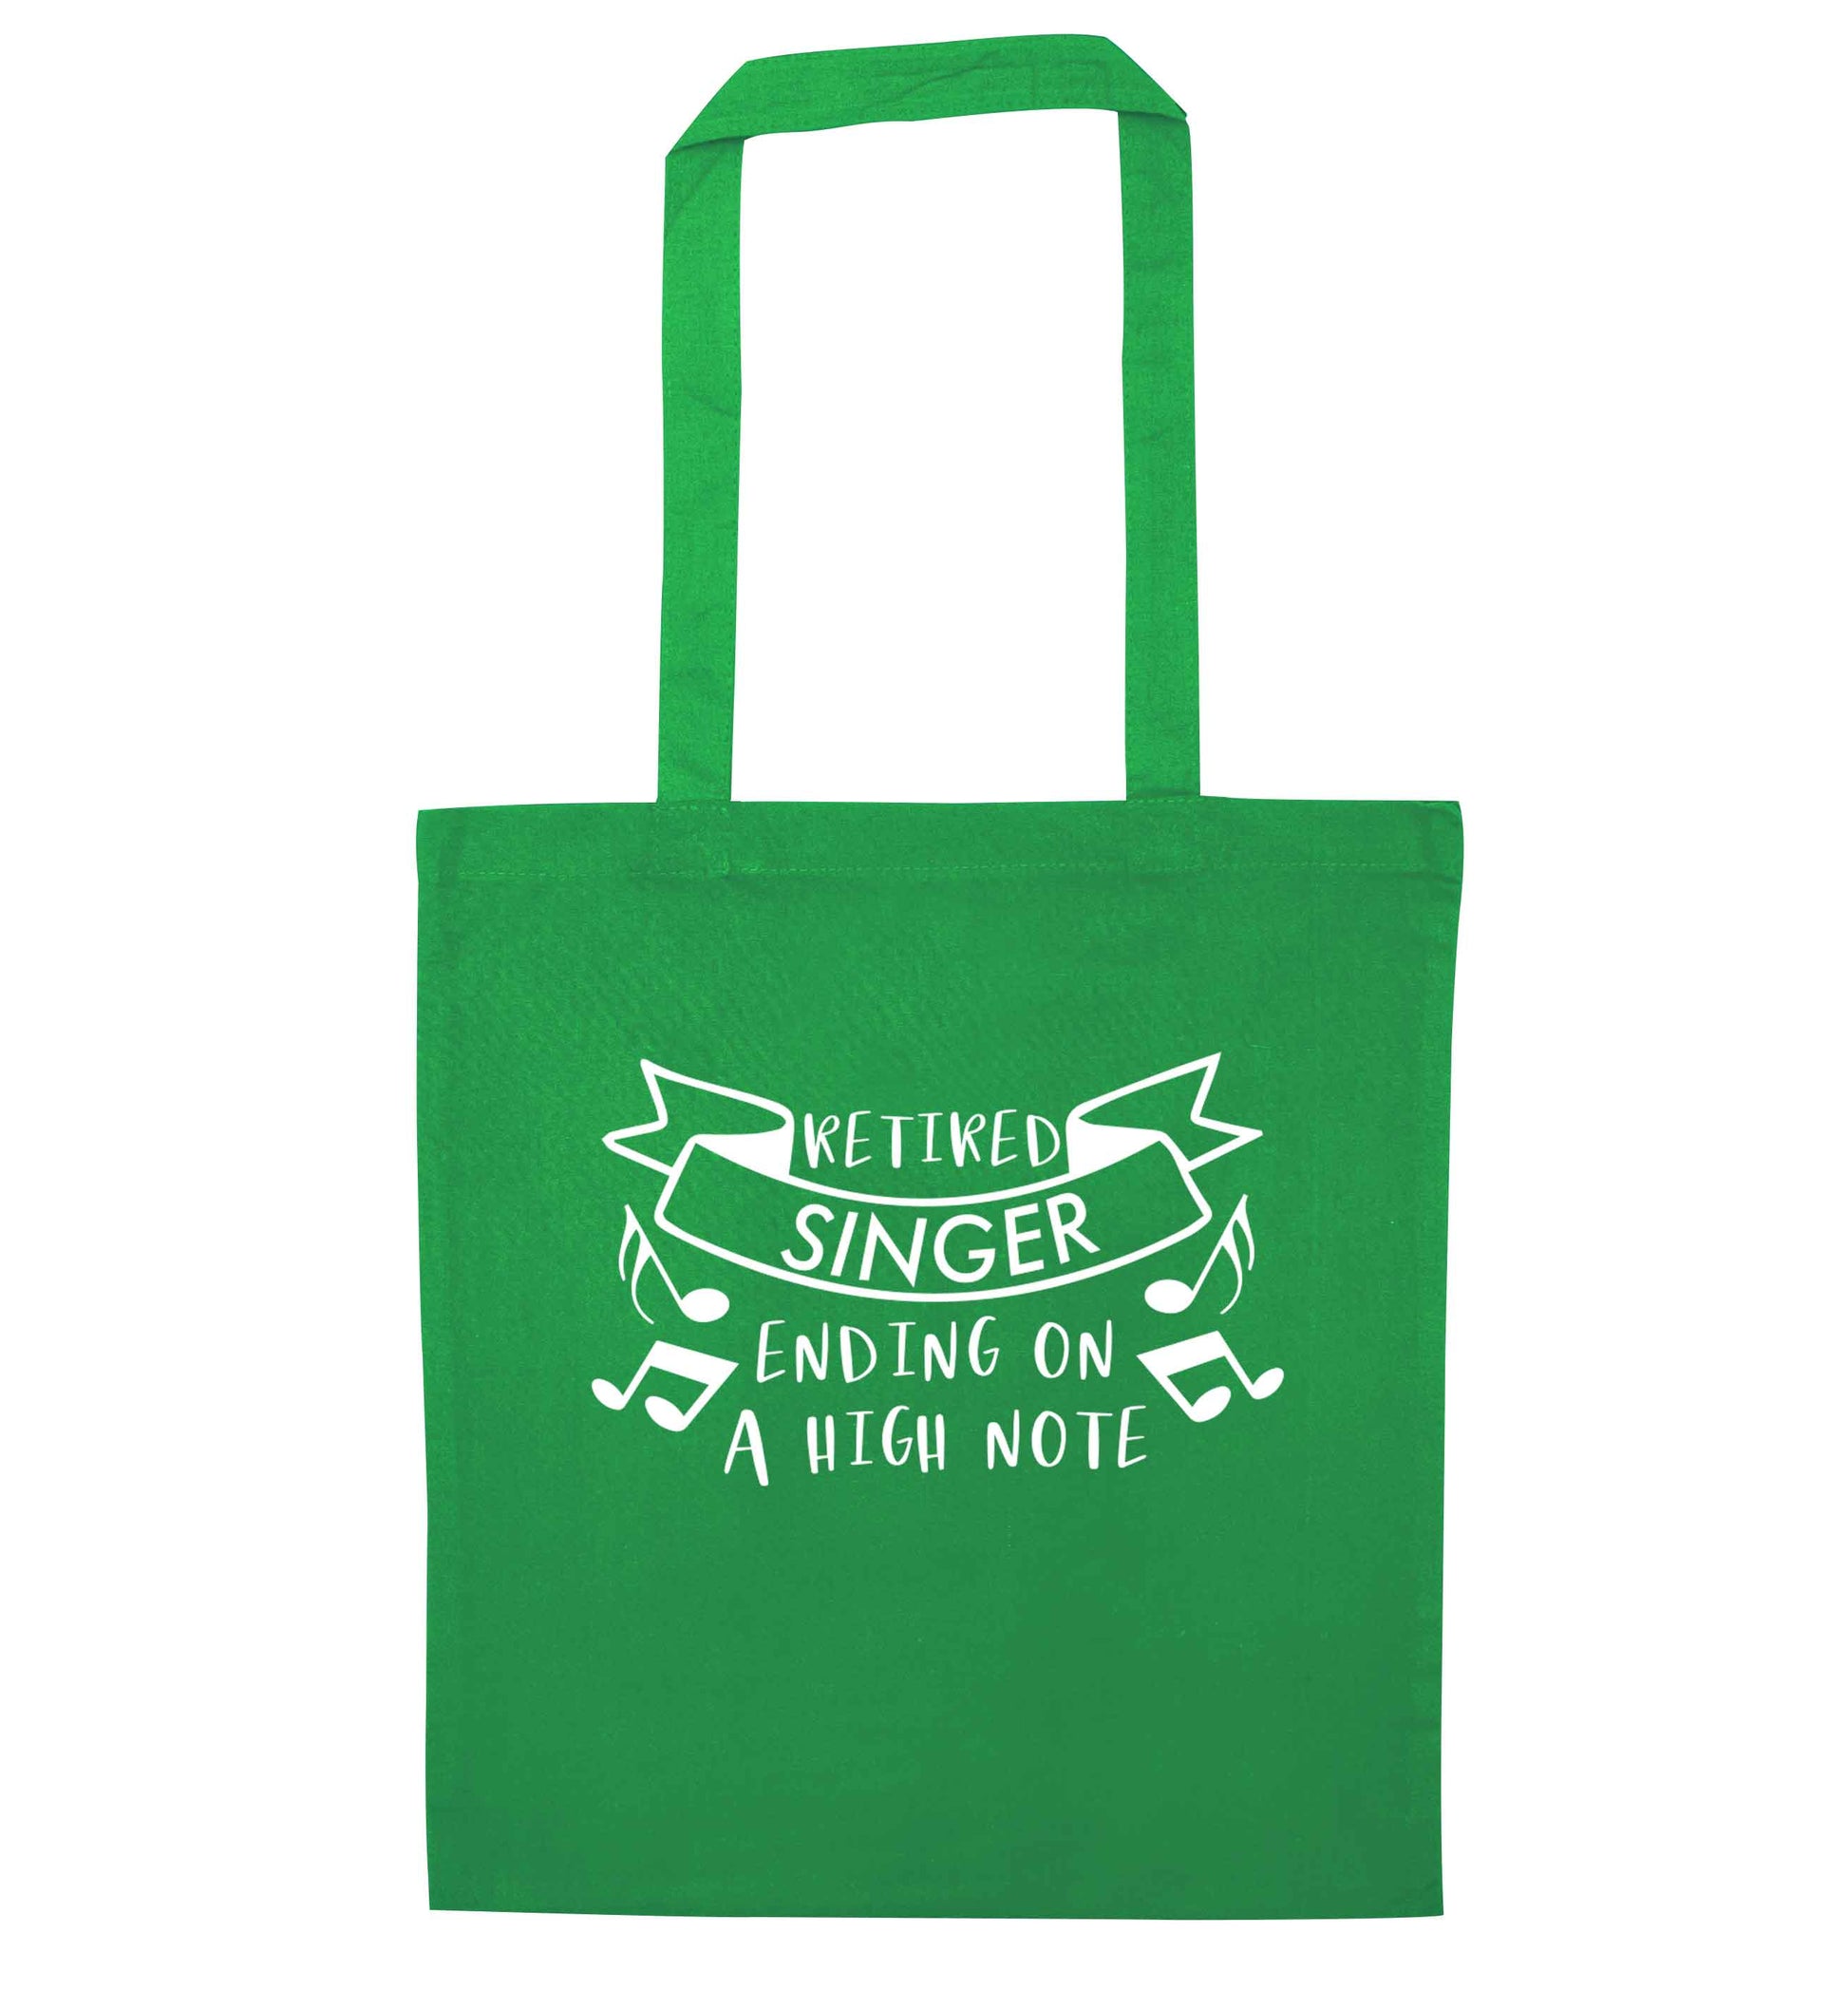 Retired singer ending on a high note green tote bag